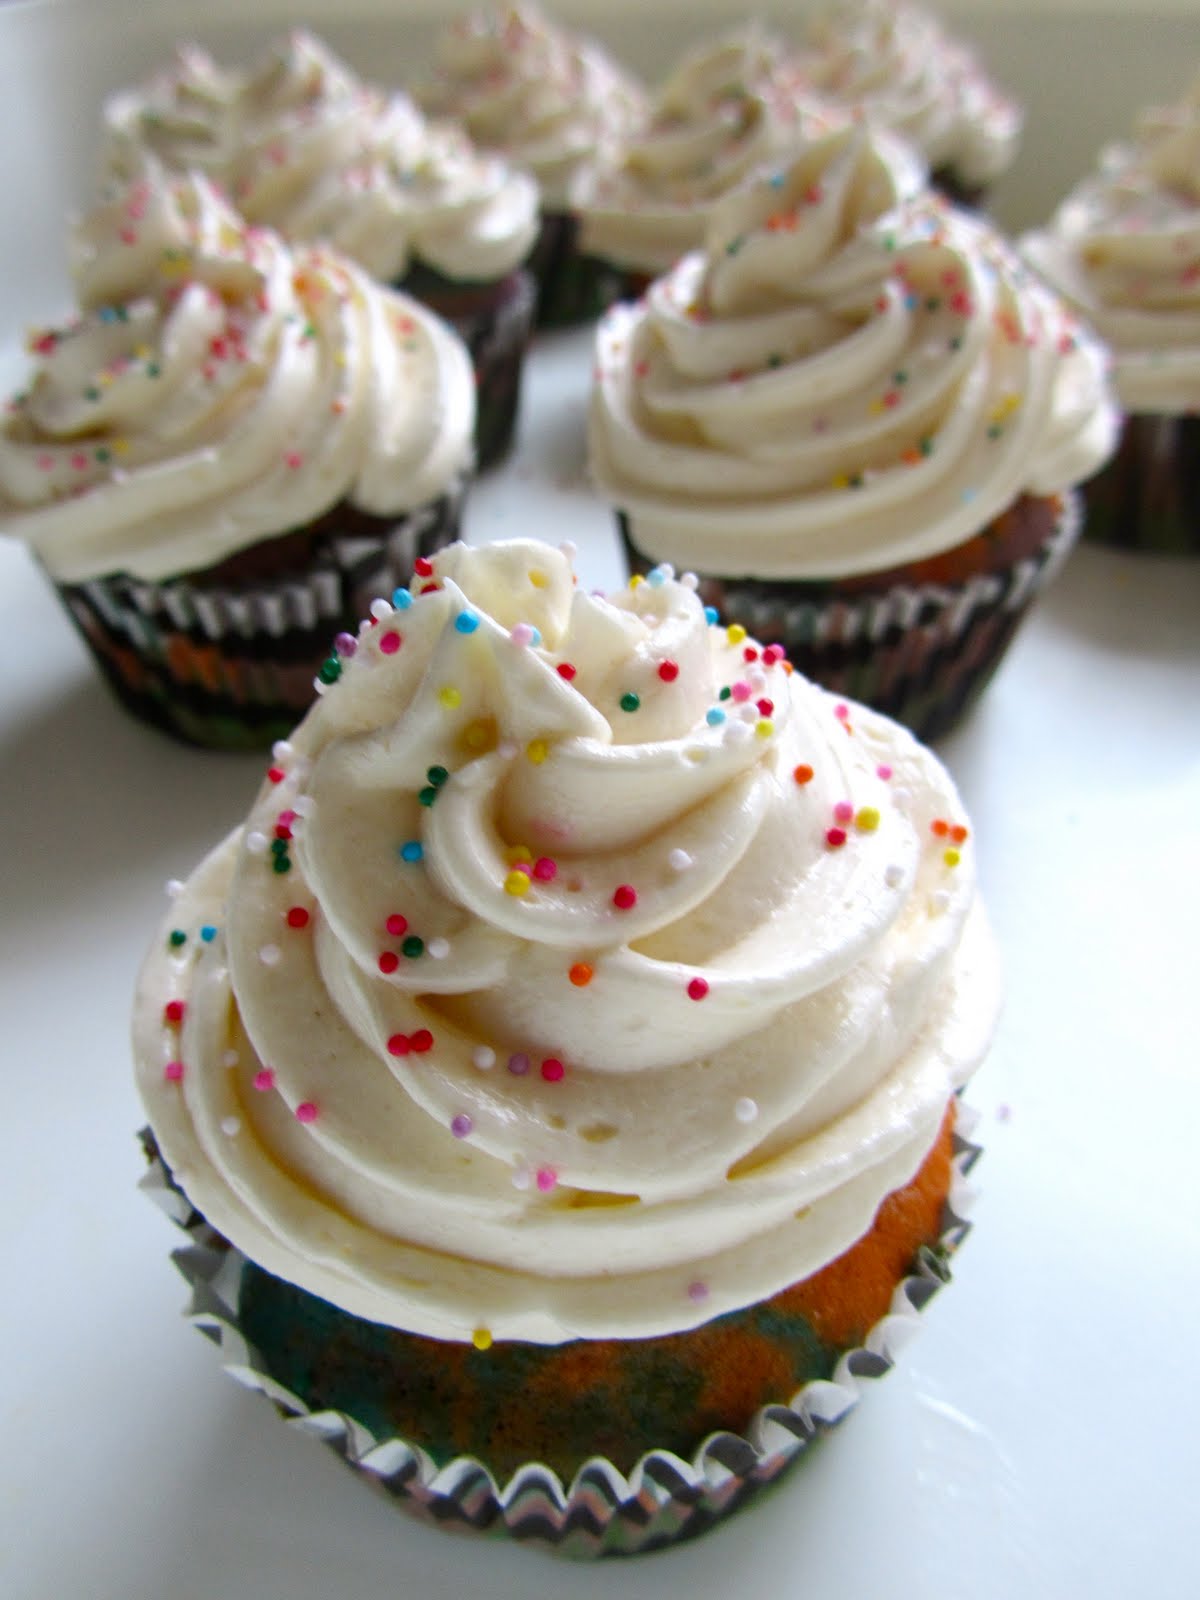 A Little Lovely: My New Favorite Frosting!